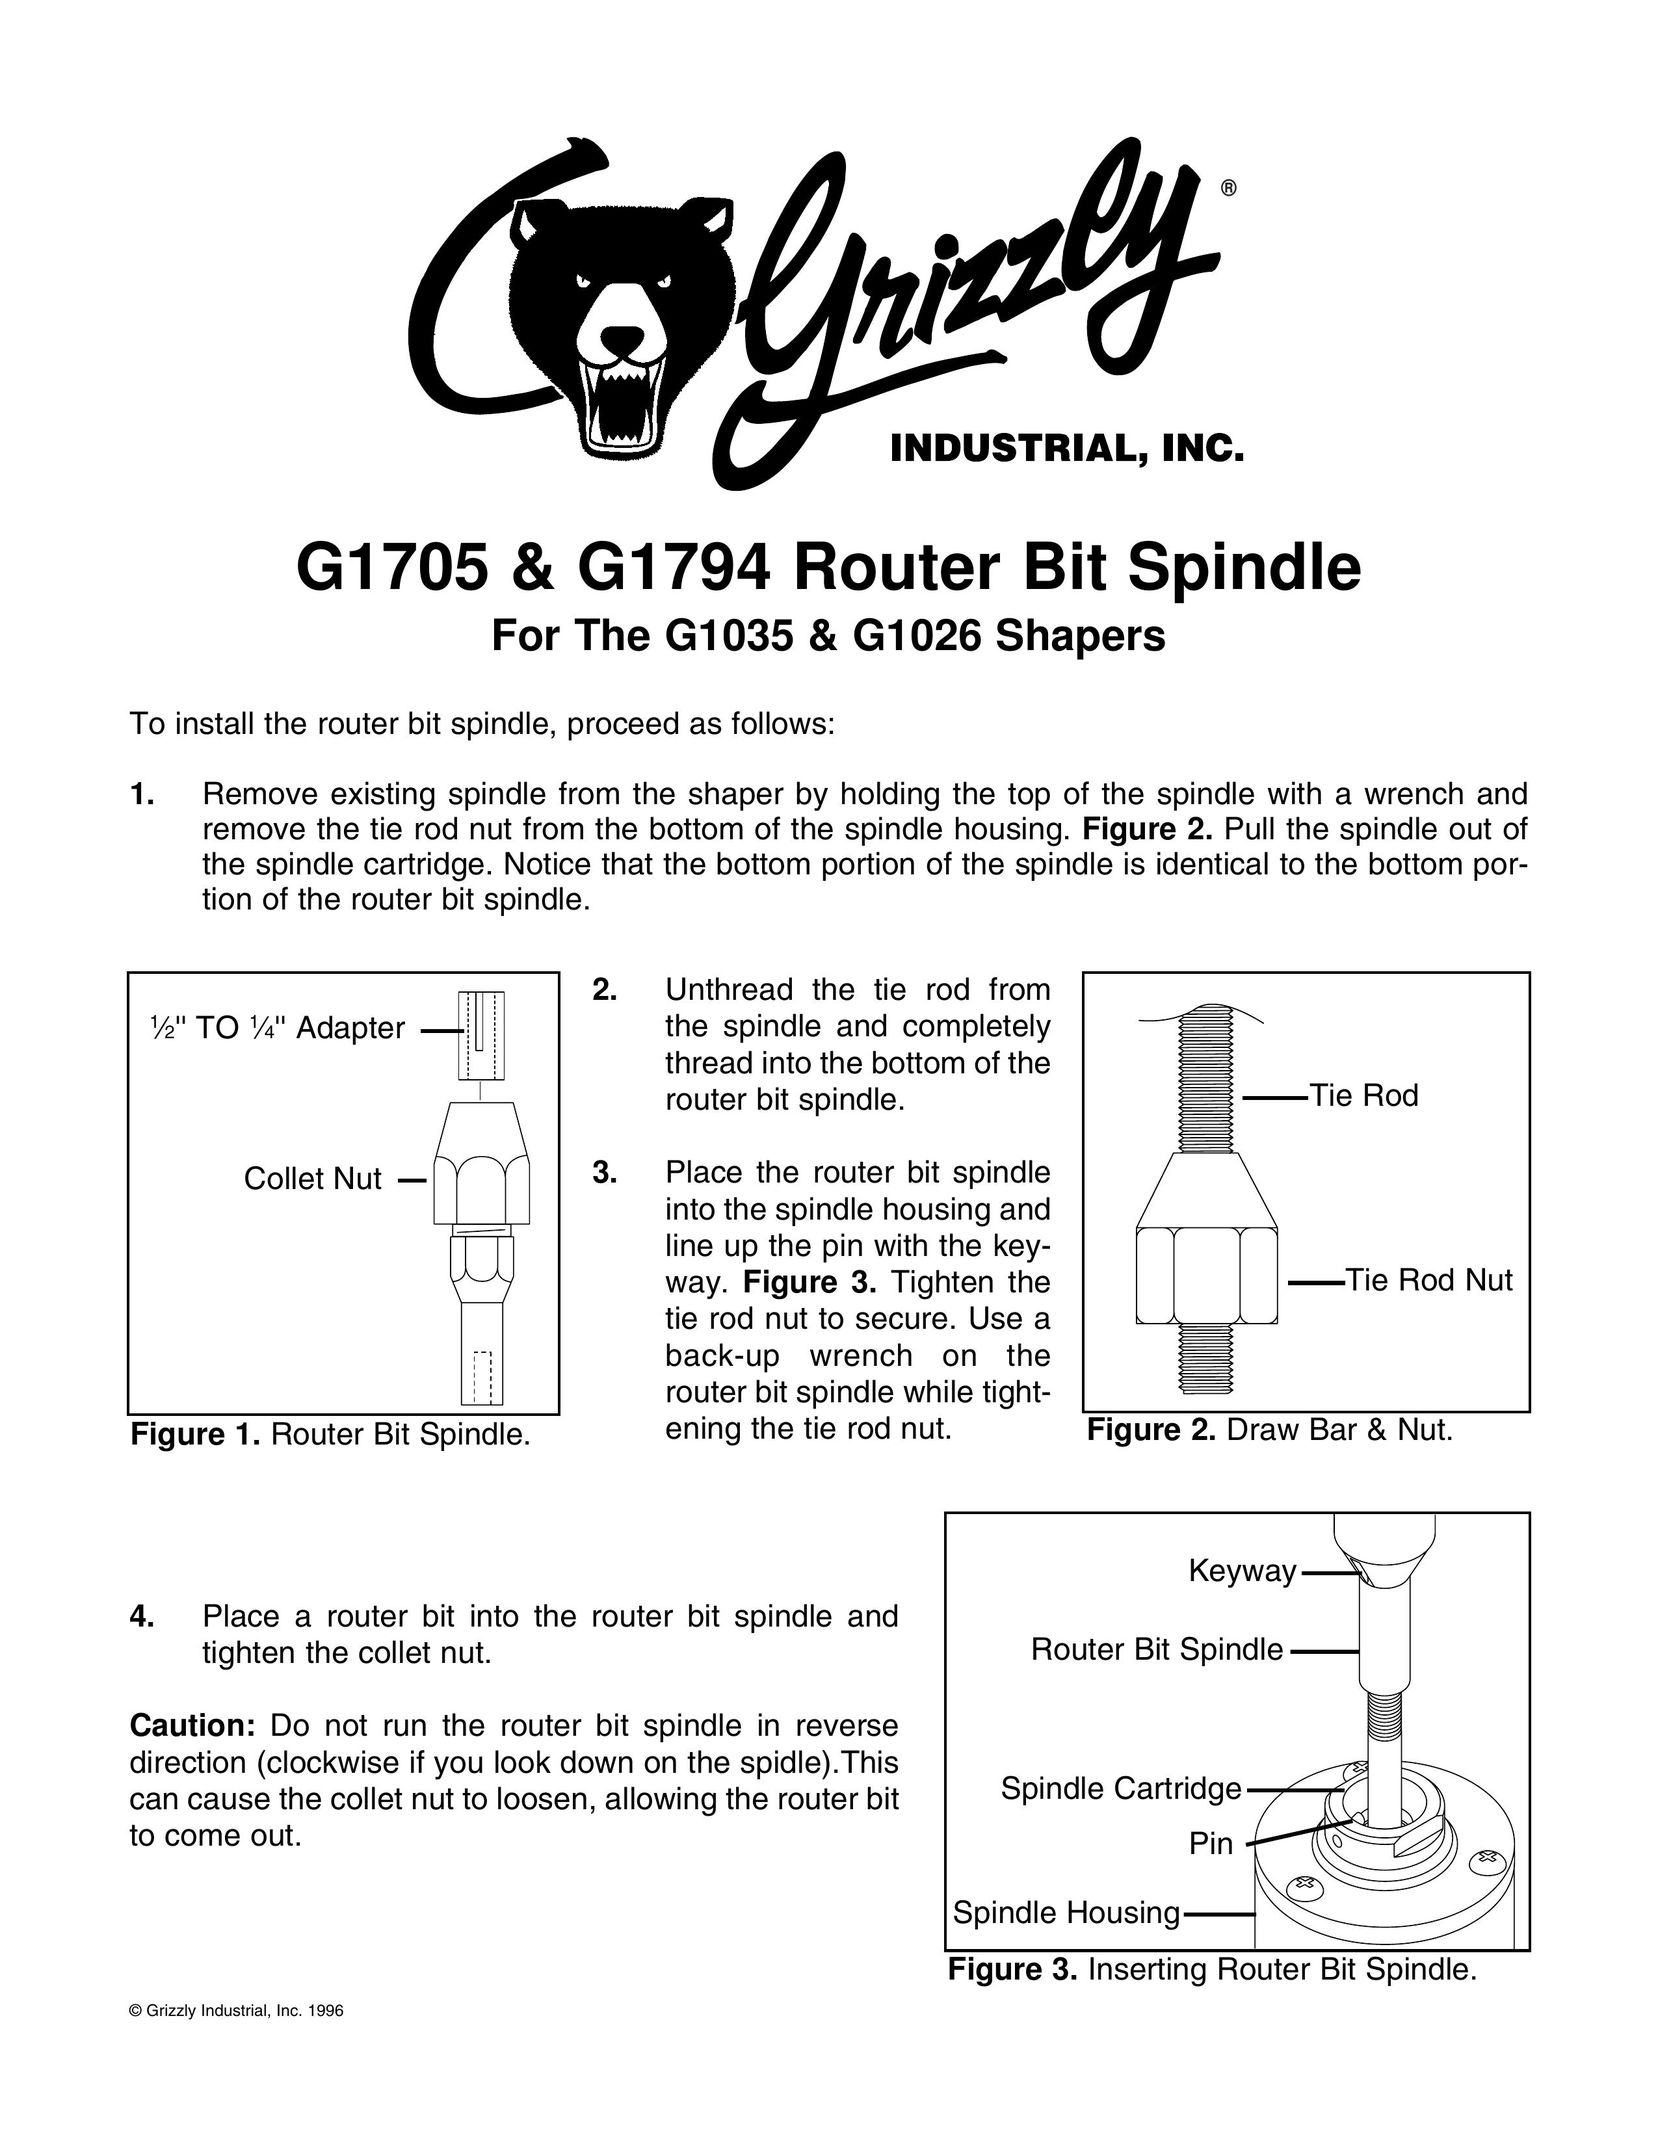 Grizzly G1794 Network Router User Manual